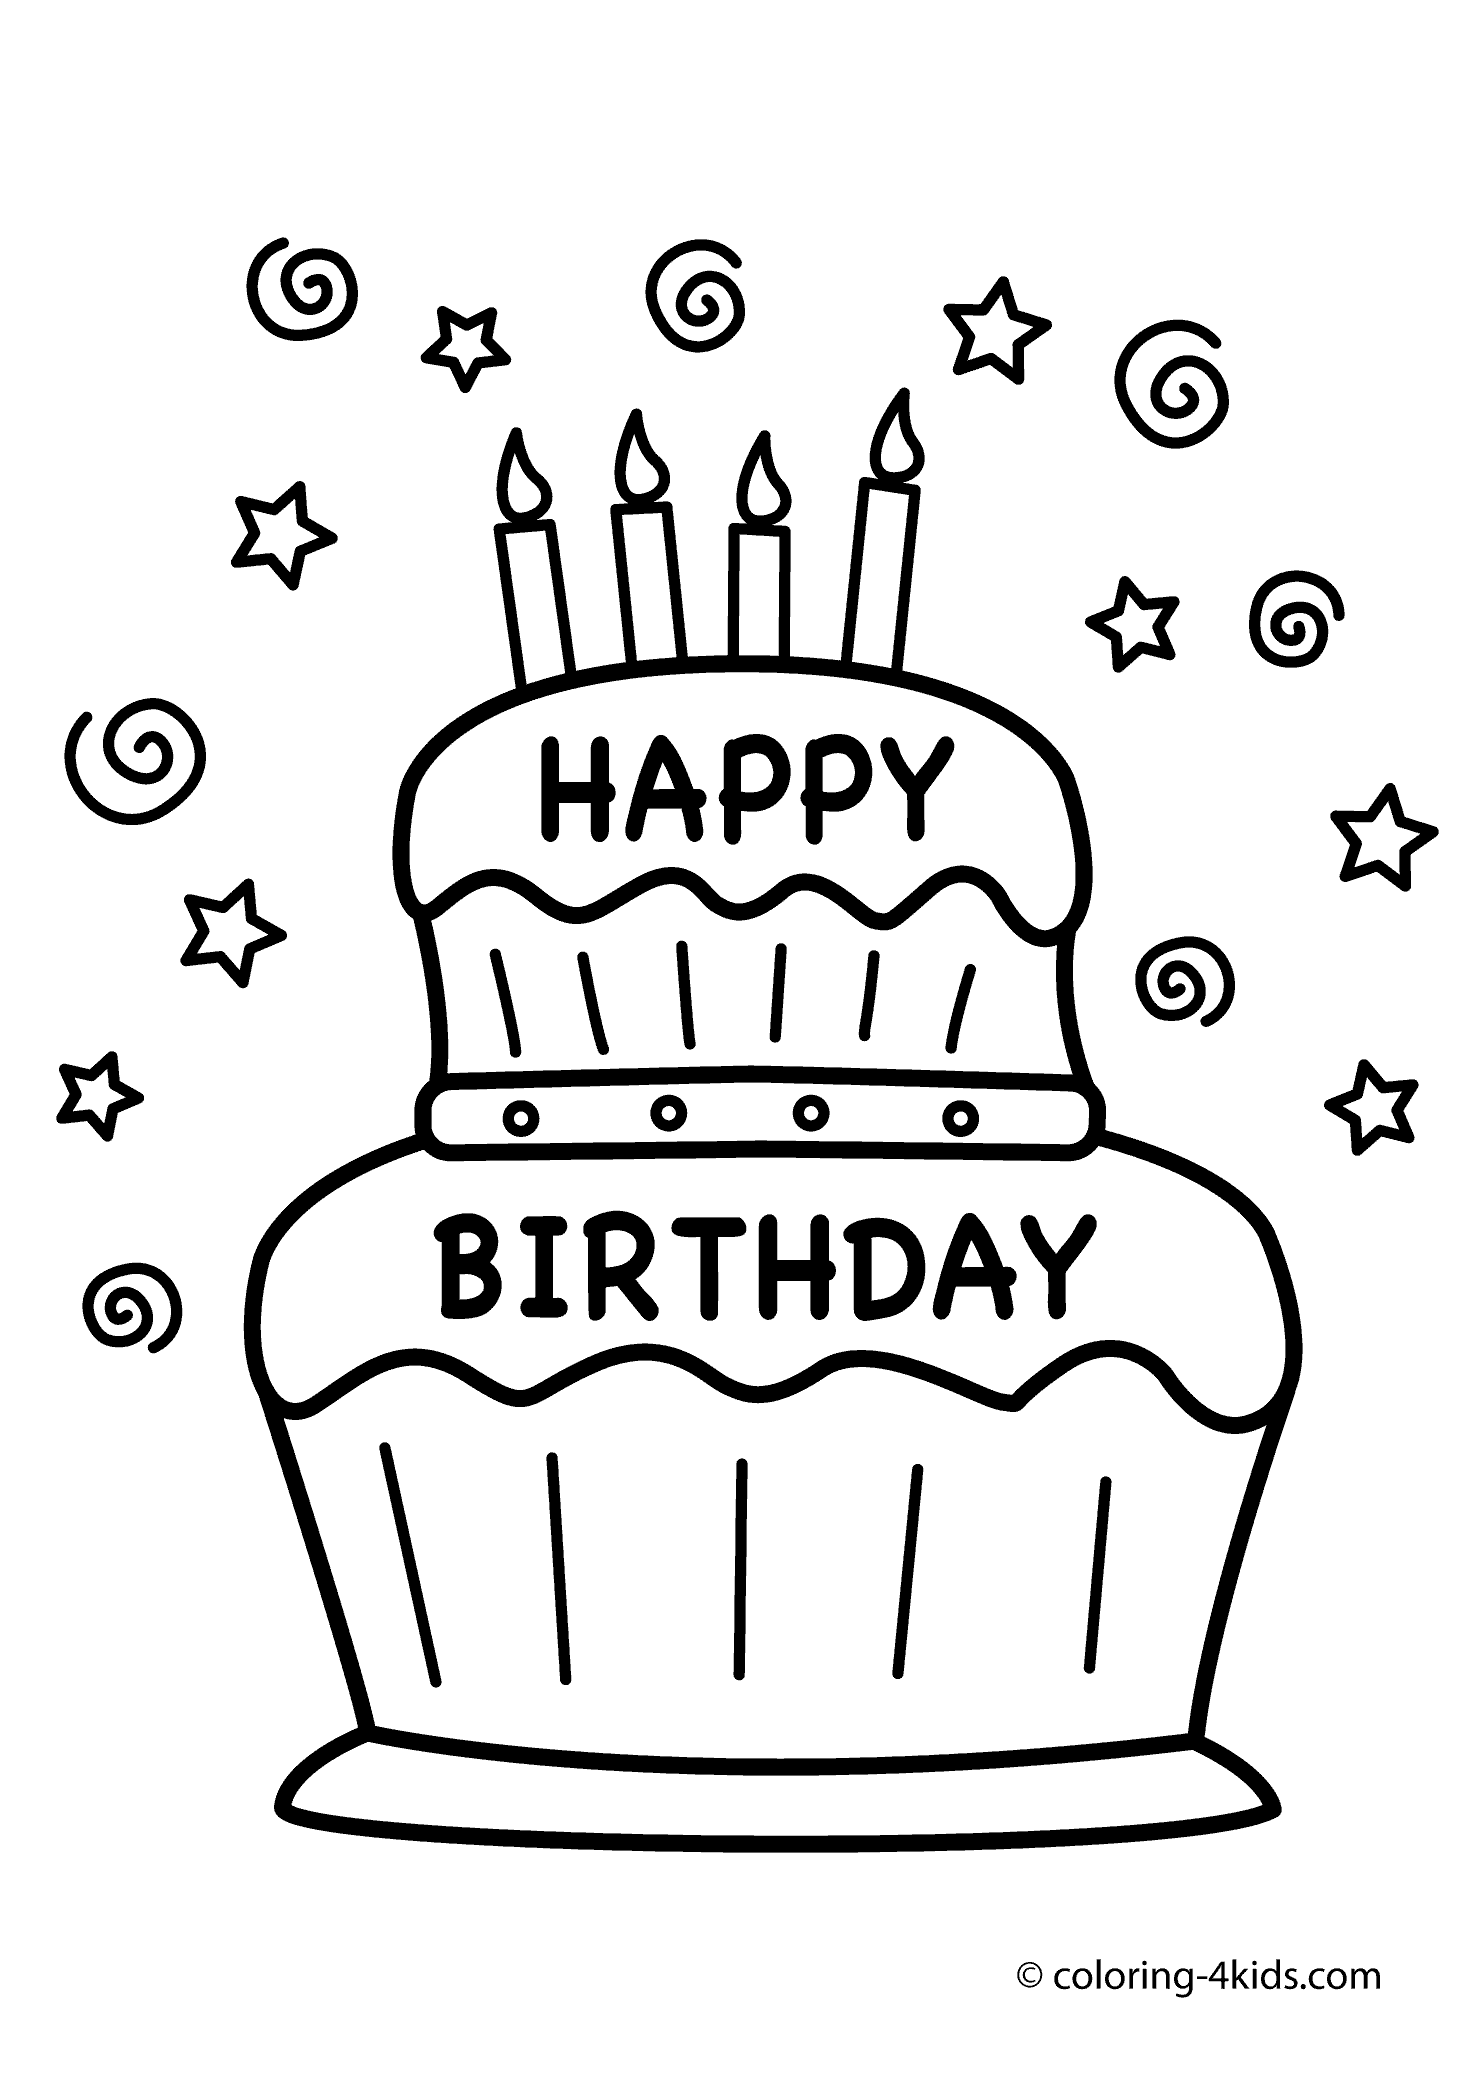 birthday cakes coloring pages - High Quality Coloring Pages